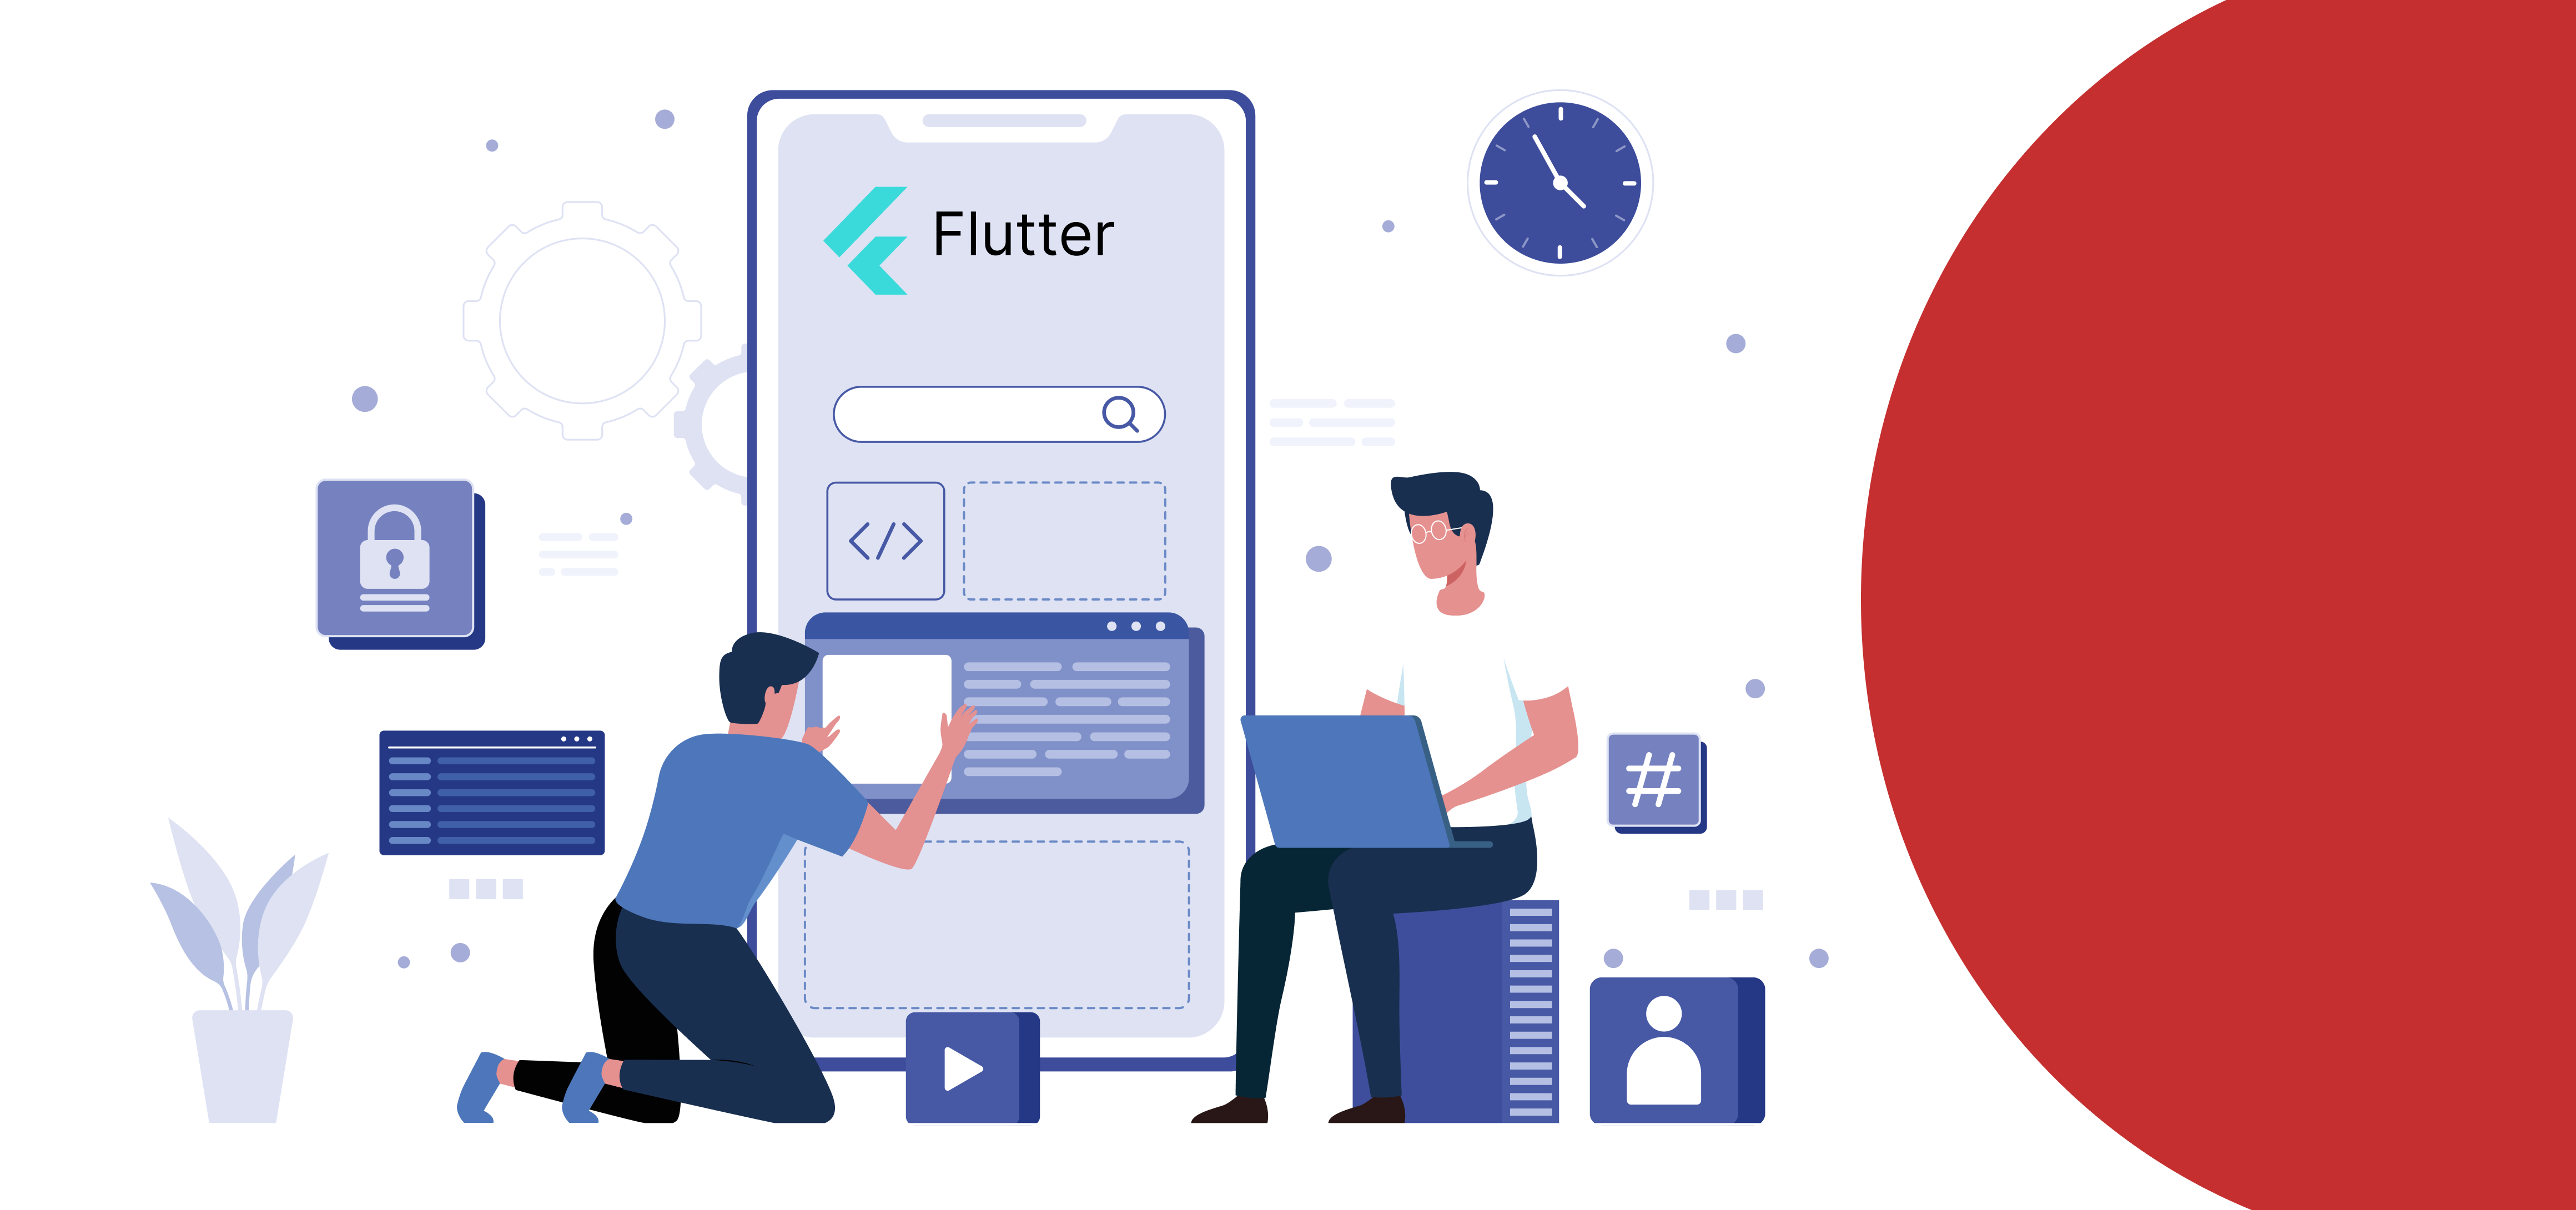 Why is Flutter the best choice for app development